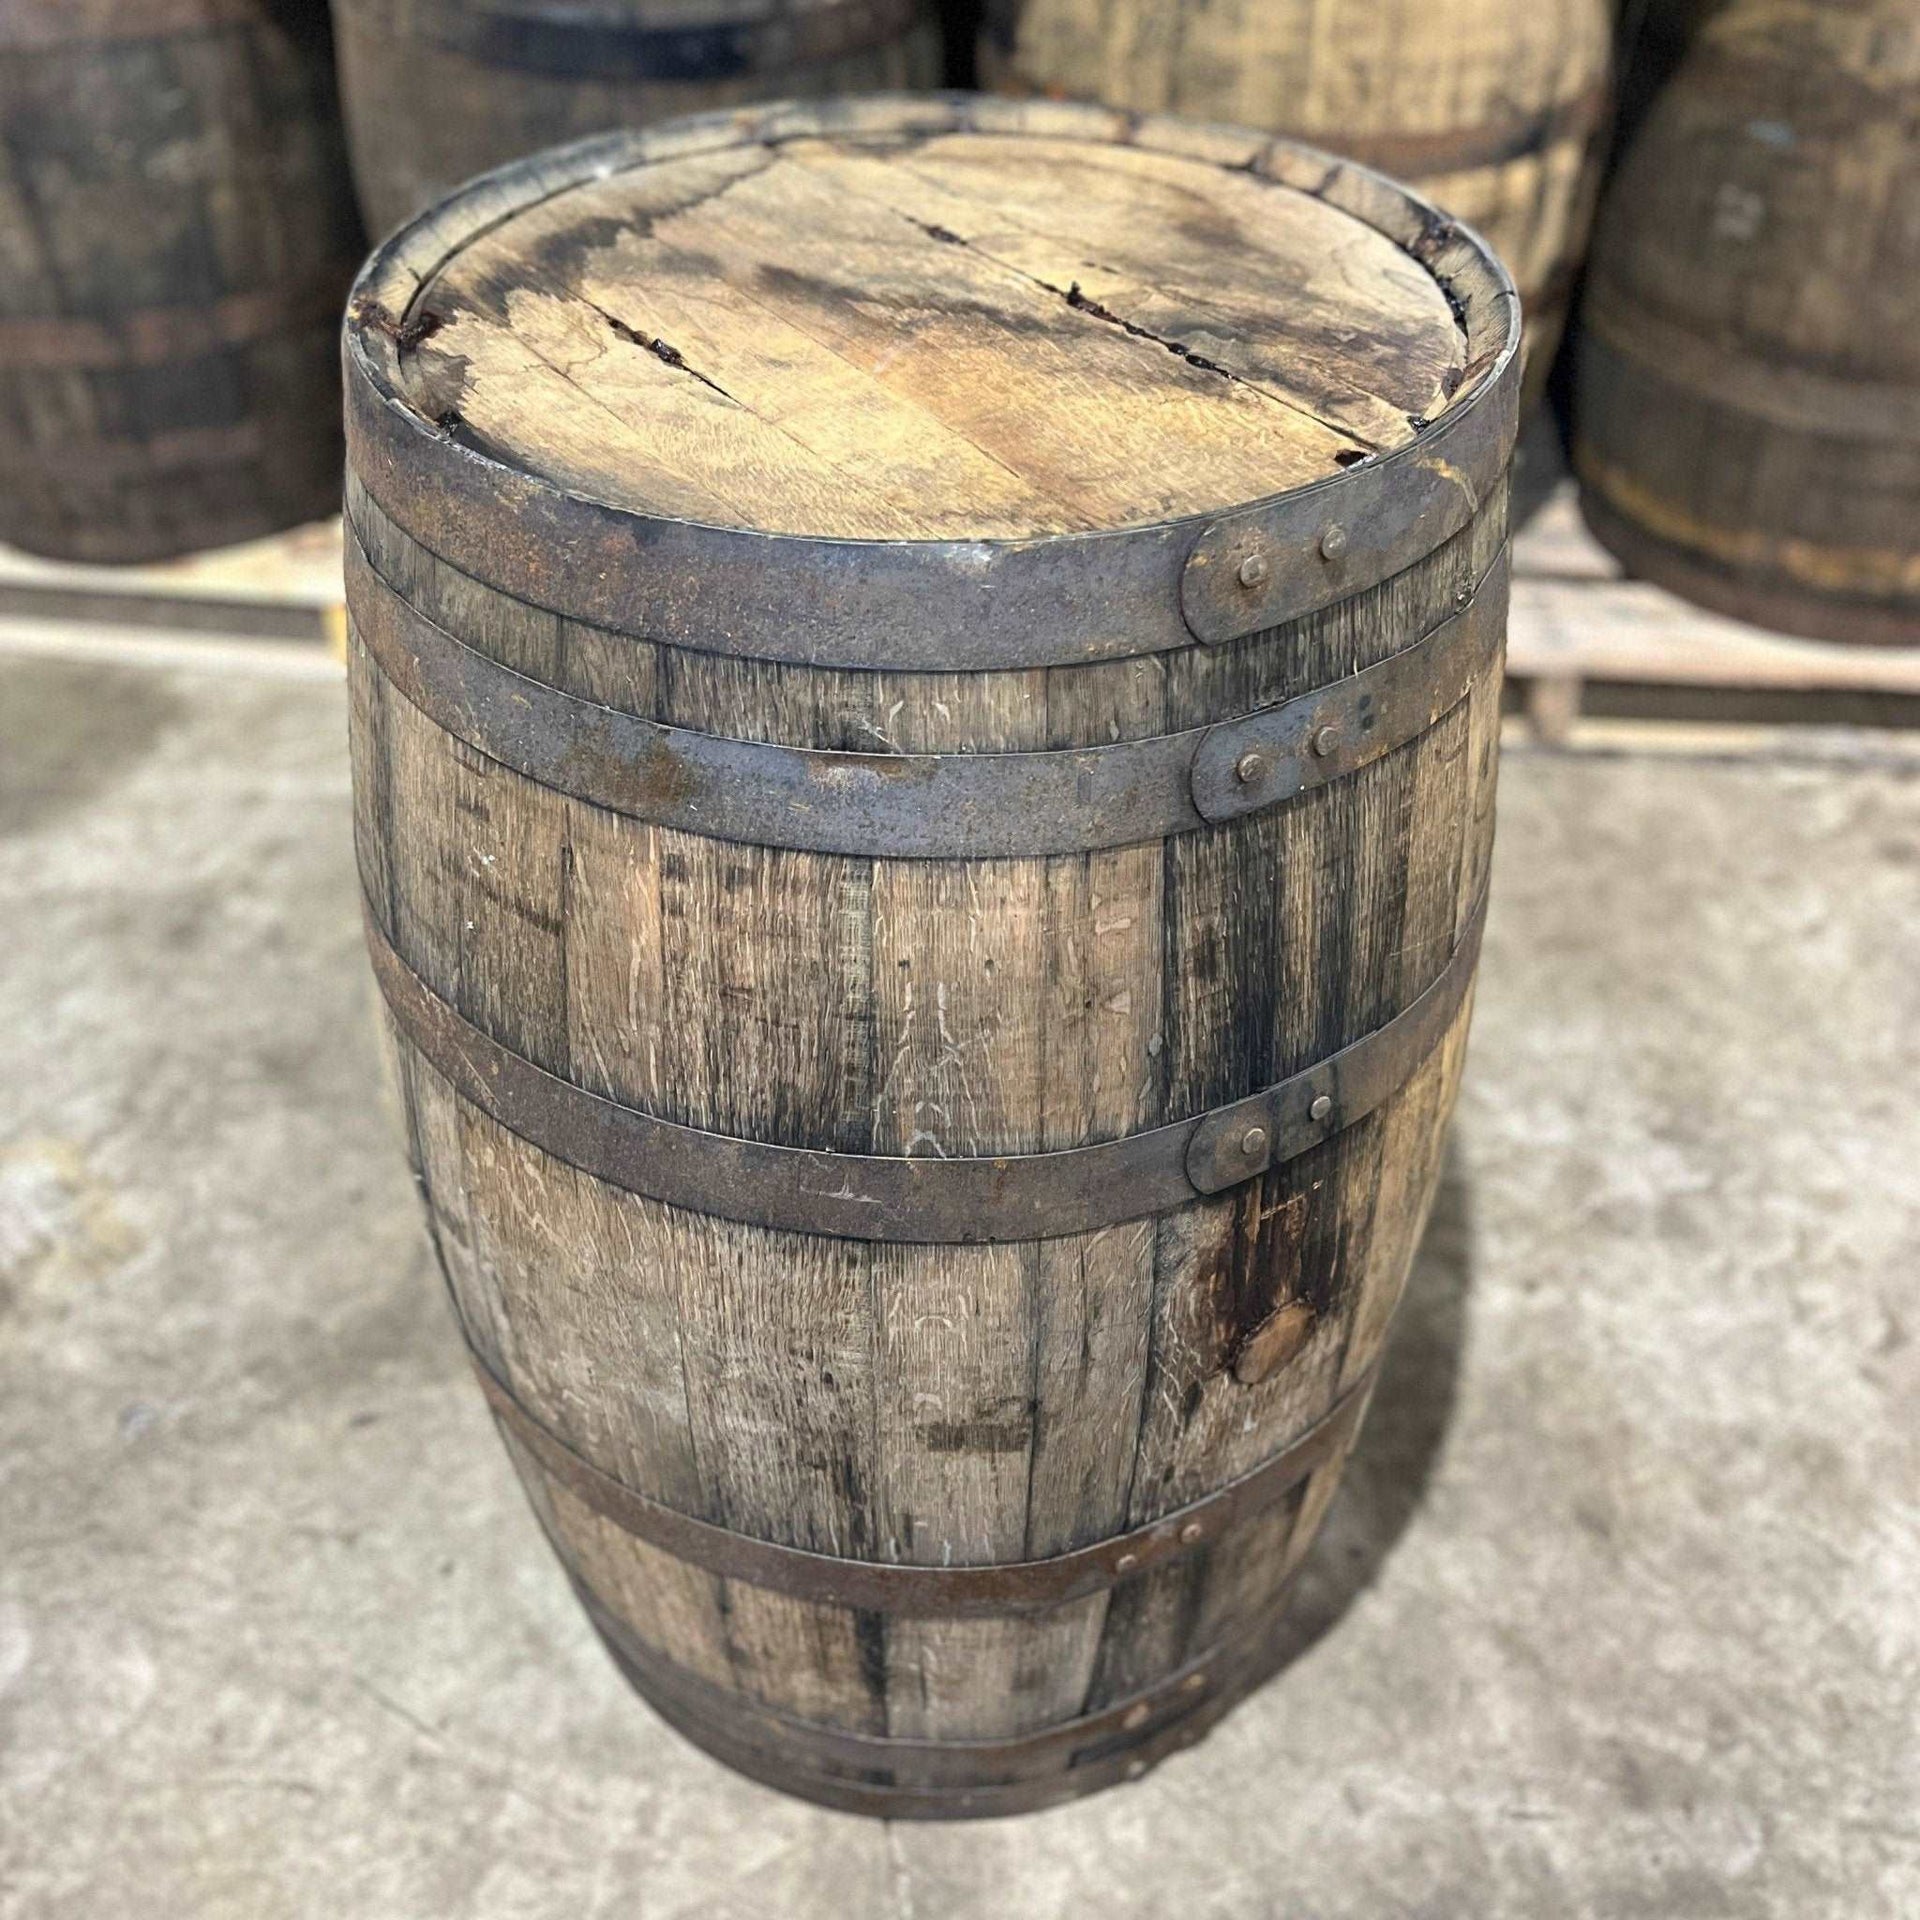 53 Gallon - Canadian Whisky Barrel - Furniture Grade - The County Cooperage